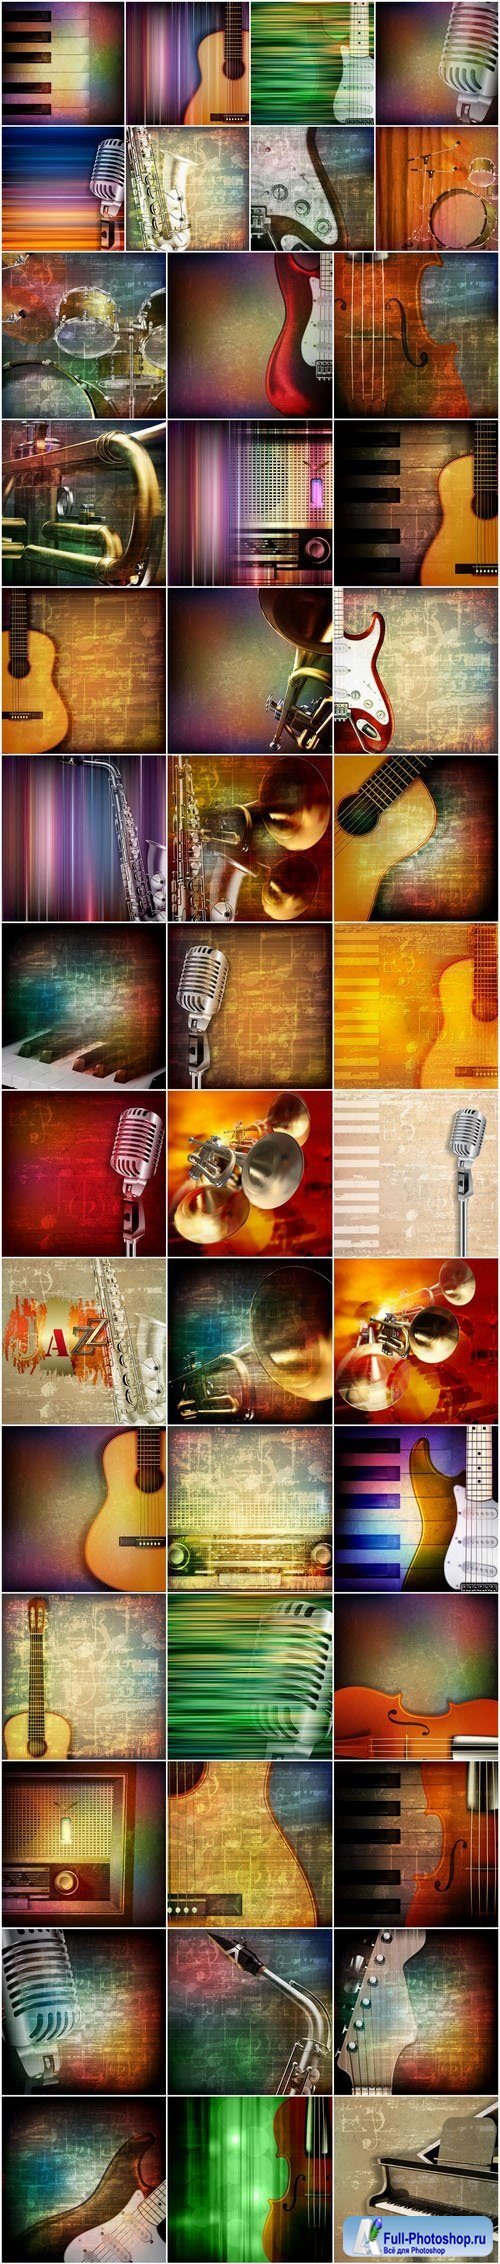 Musical instrument on abstract and grunge backgrounds - 50xEPS